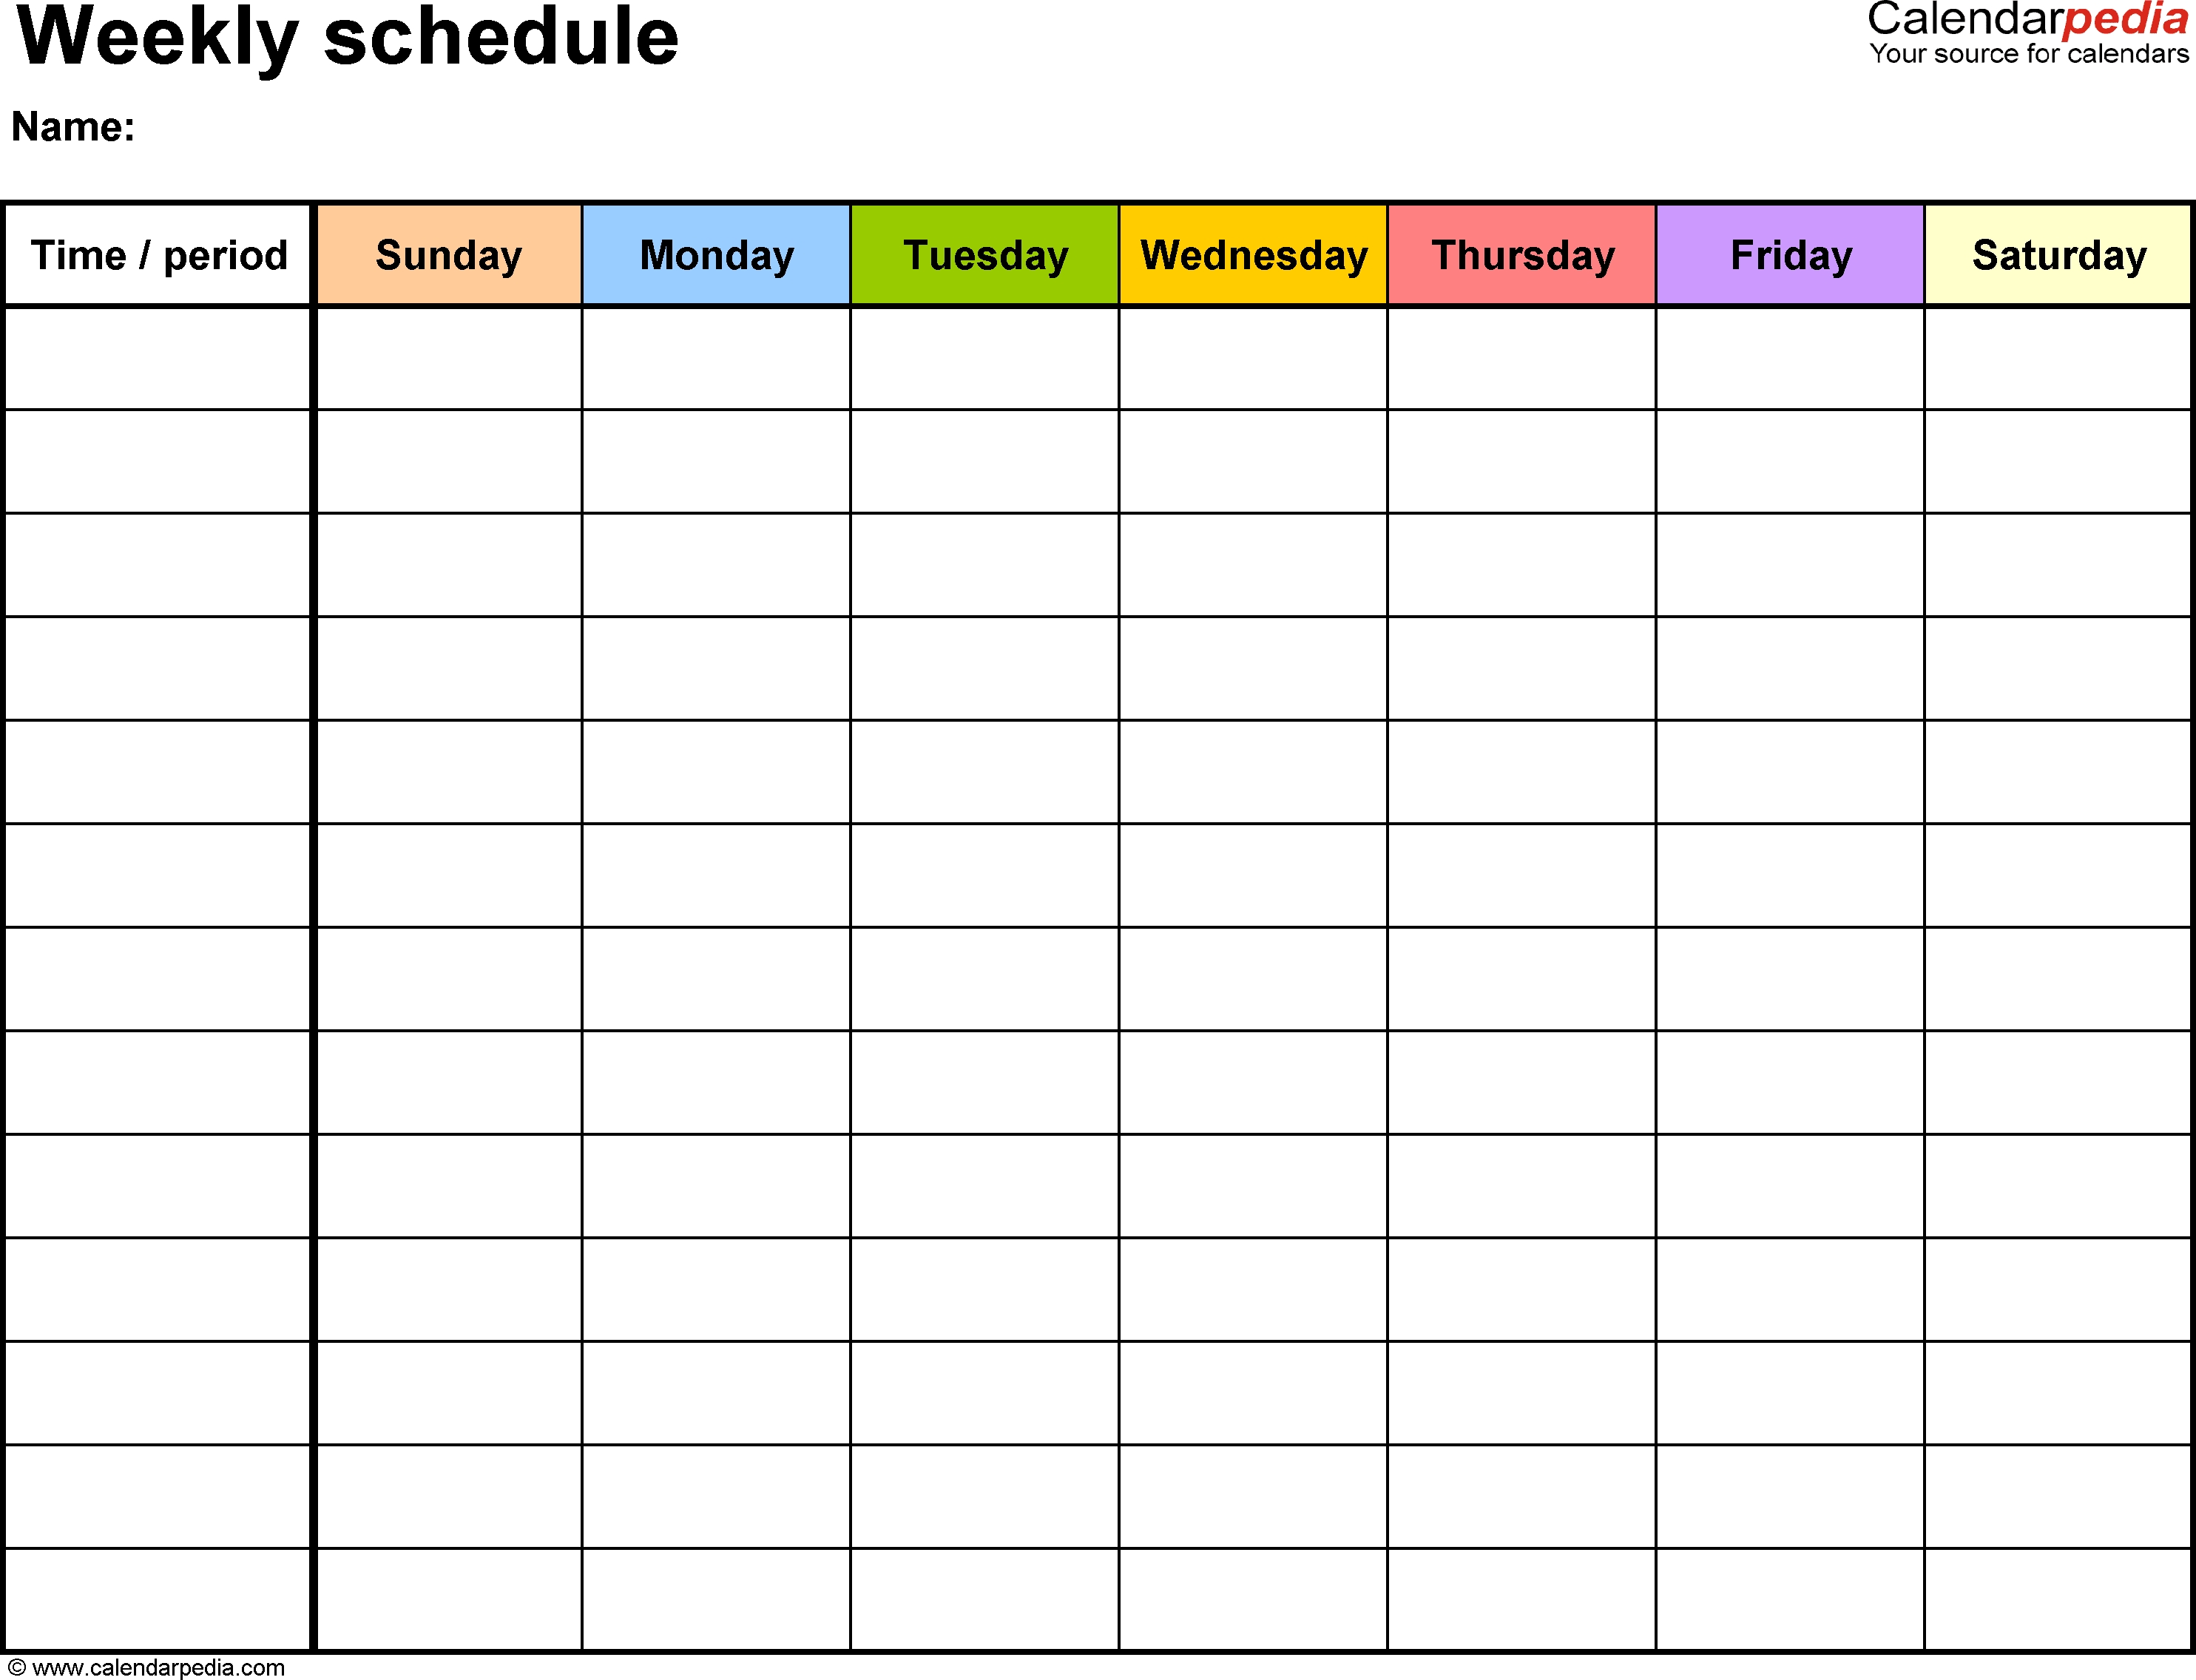 Free Weekly Schedule Templates For Excel - 18 Templates | ~Yoga in Blank Weekly Schedule Template Printable